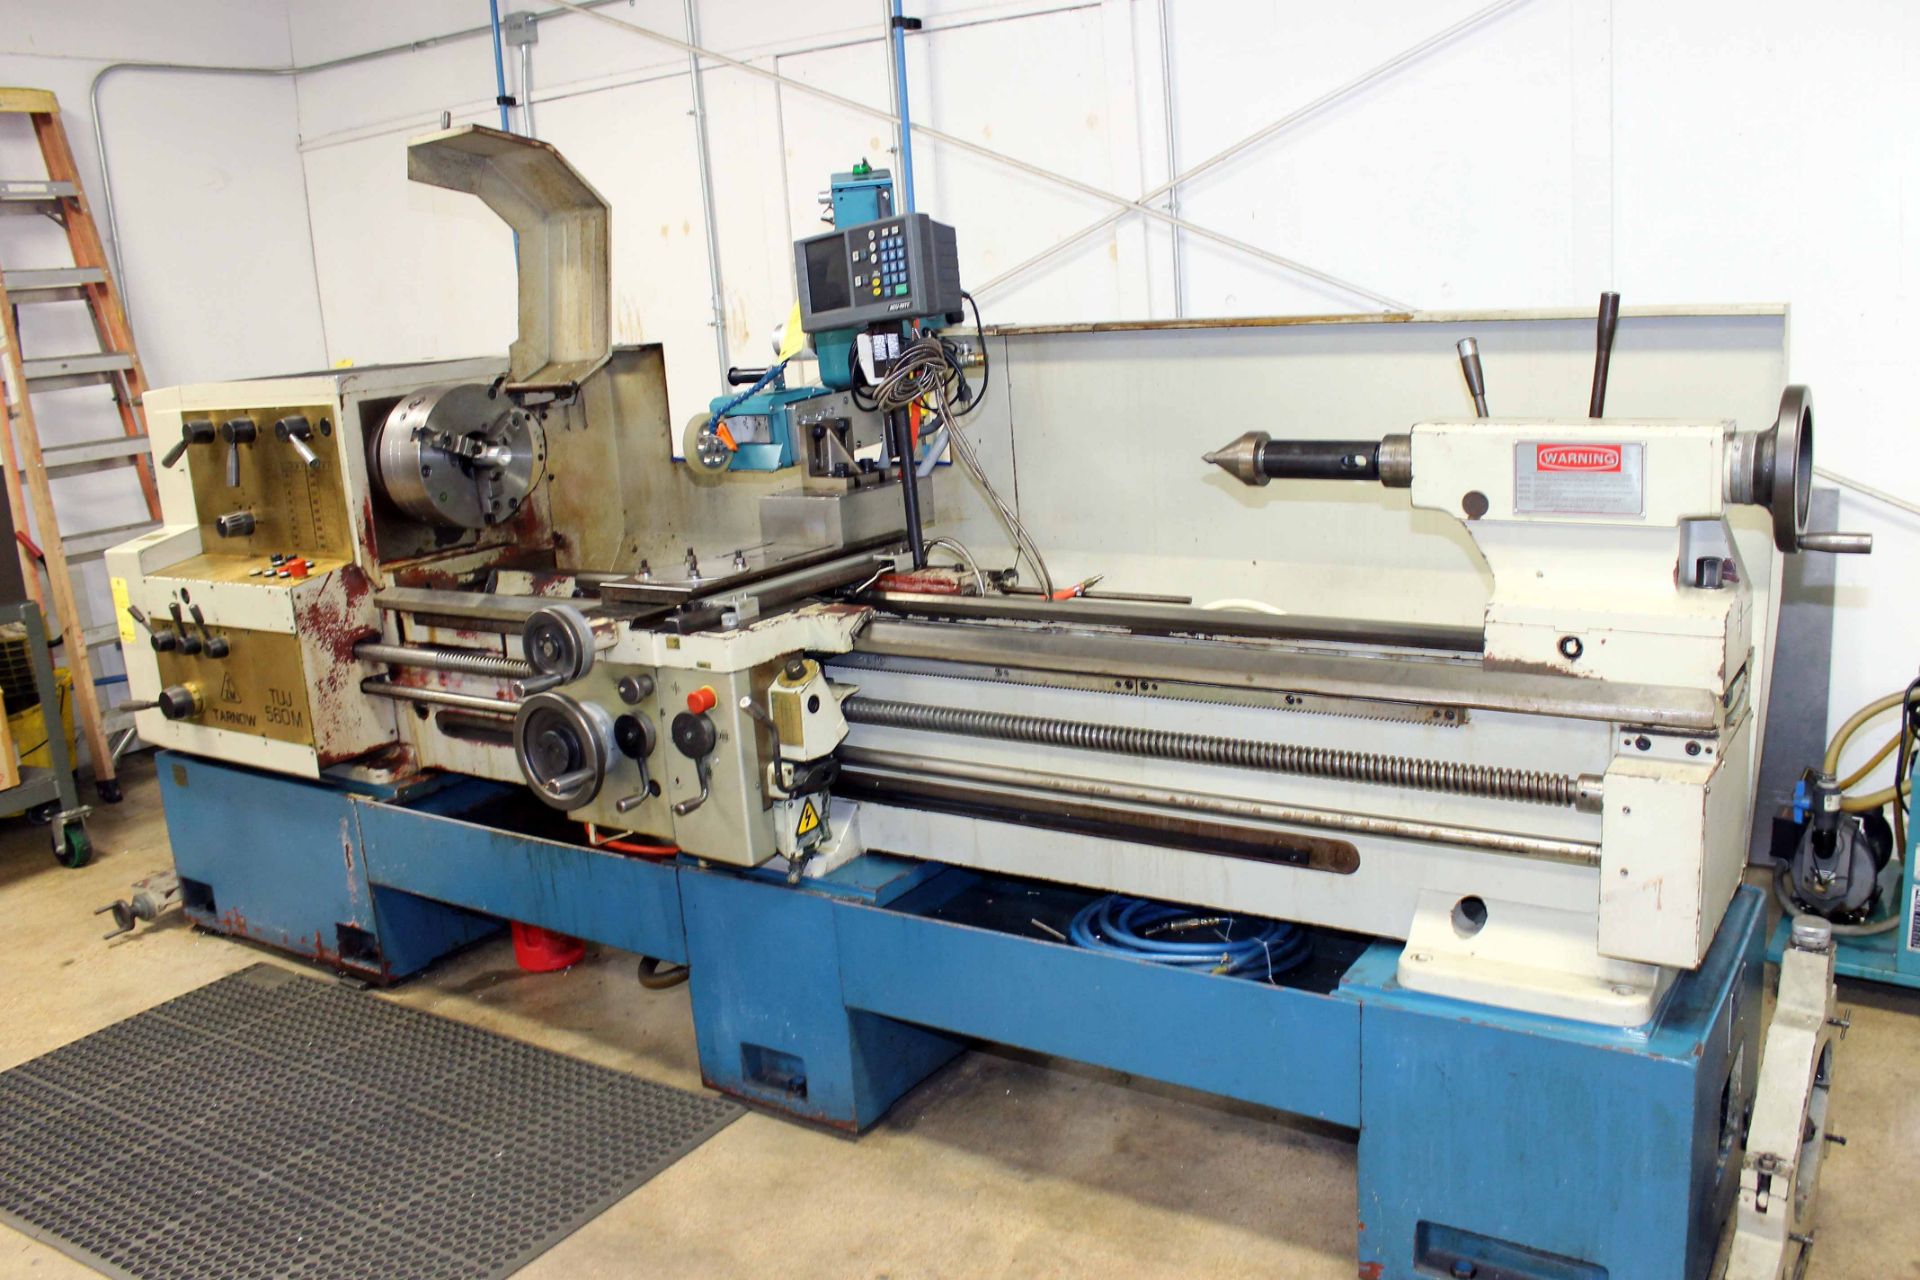 GAP BED ENGINE LATHE, TARNOW 21" X 80" MDL. TUJ560M, spds: 20-1600 RPM, inch/metric thdng., taper - Image 2 of 2